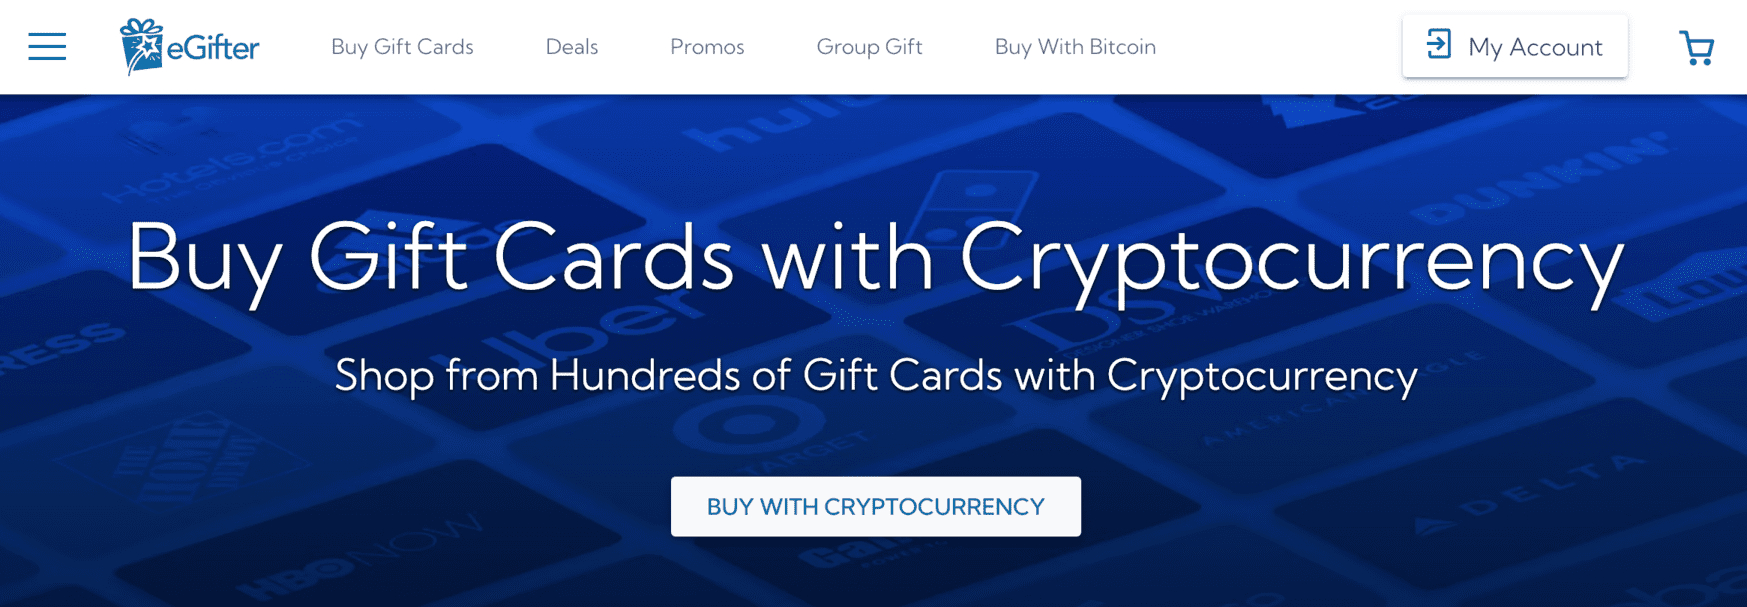 Shop for Gift Cards with Cryptocurrency, Bitcoin, Litecoin, Dash, Ethereum